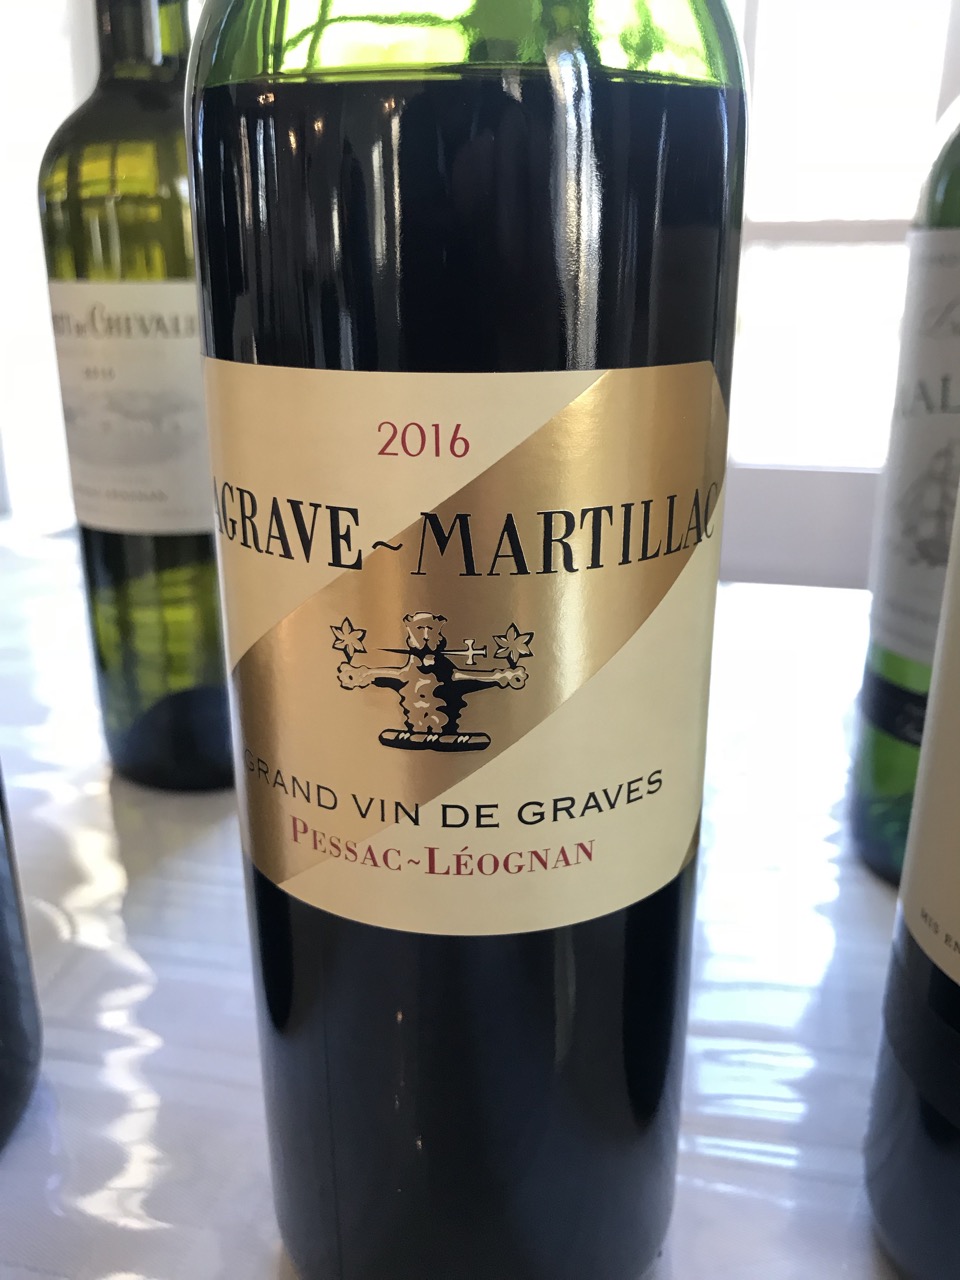 Pessac-Léognan and Graves from bottle | Wine 2016 Chronicles